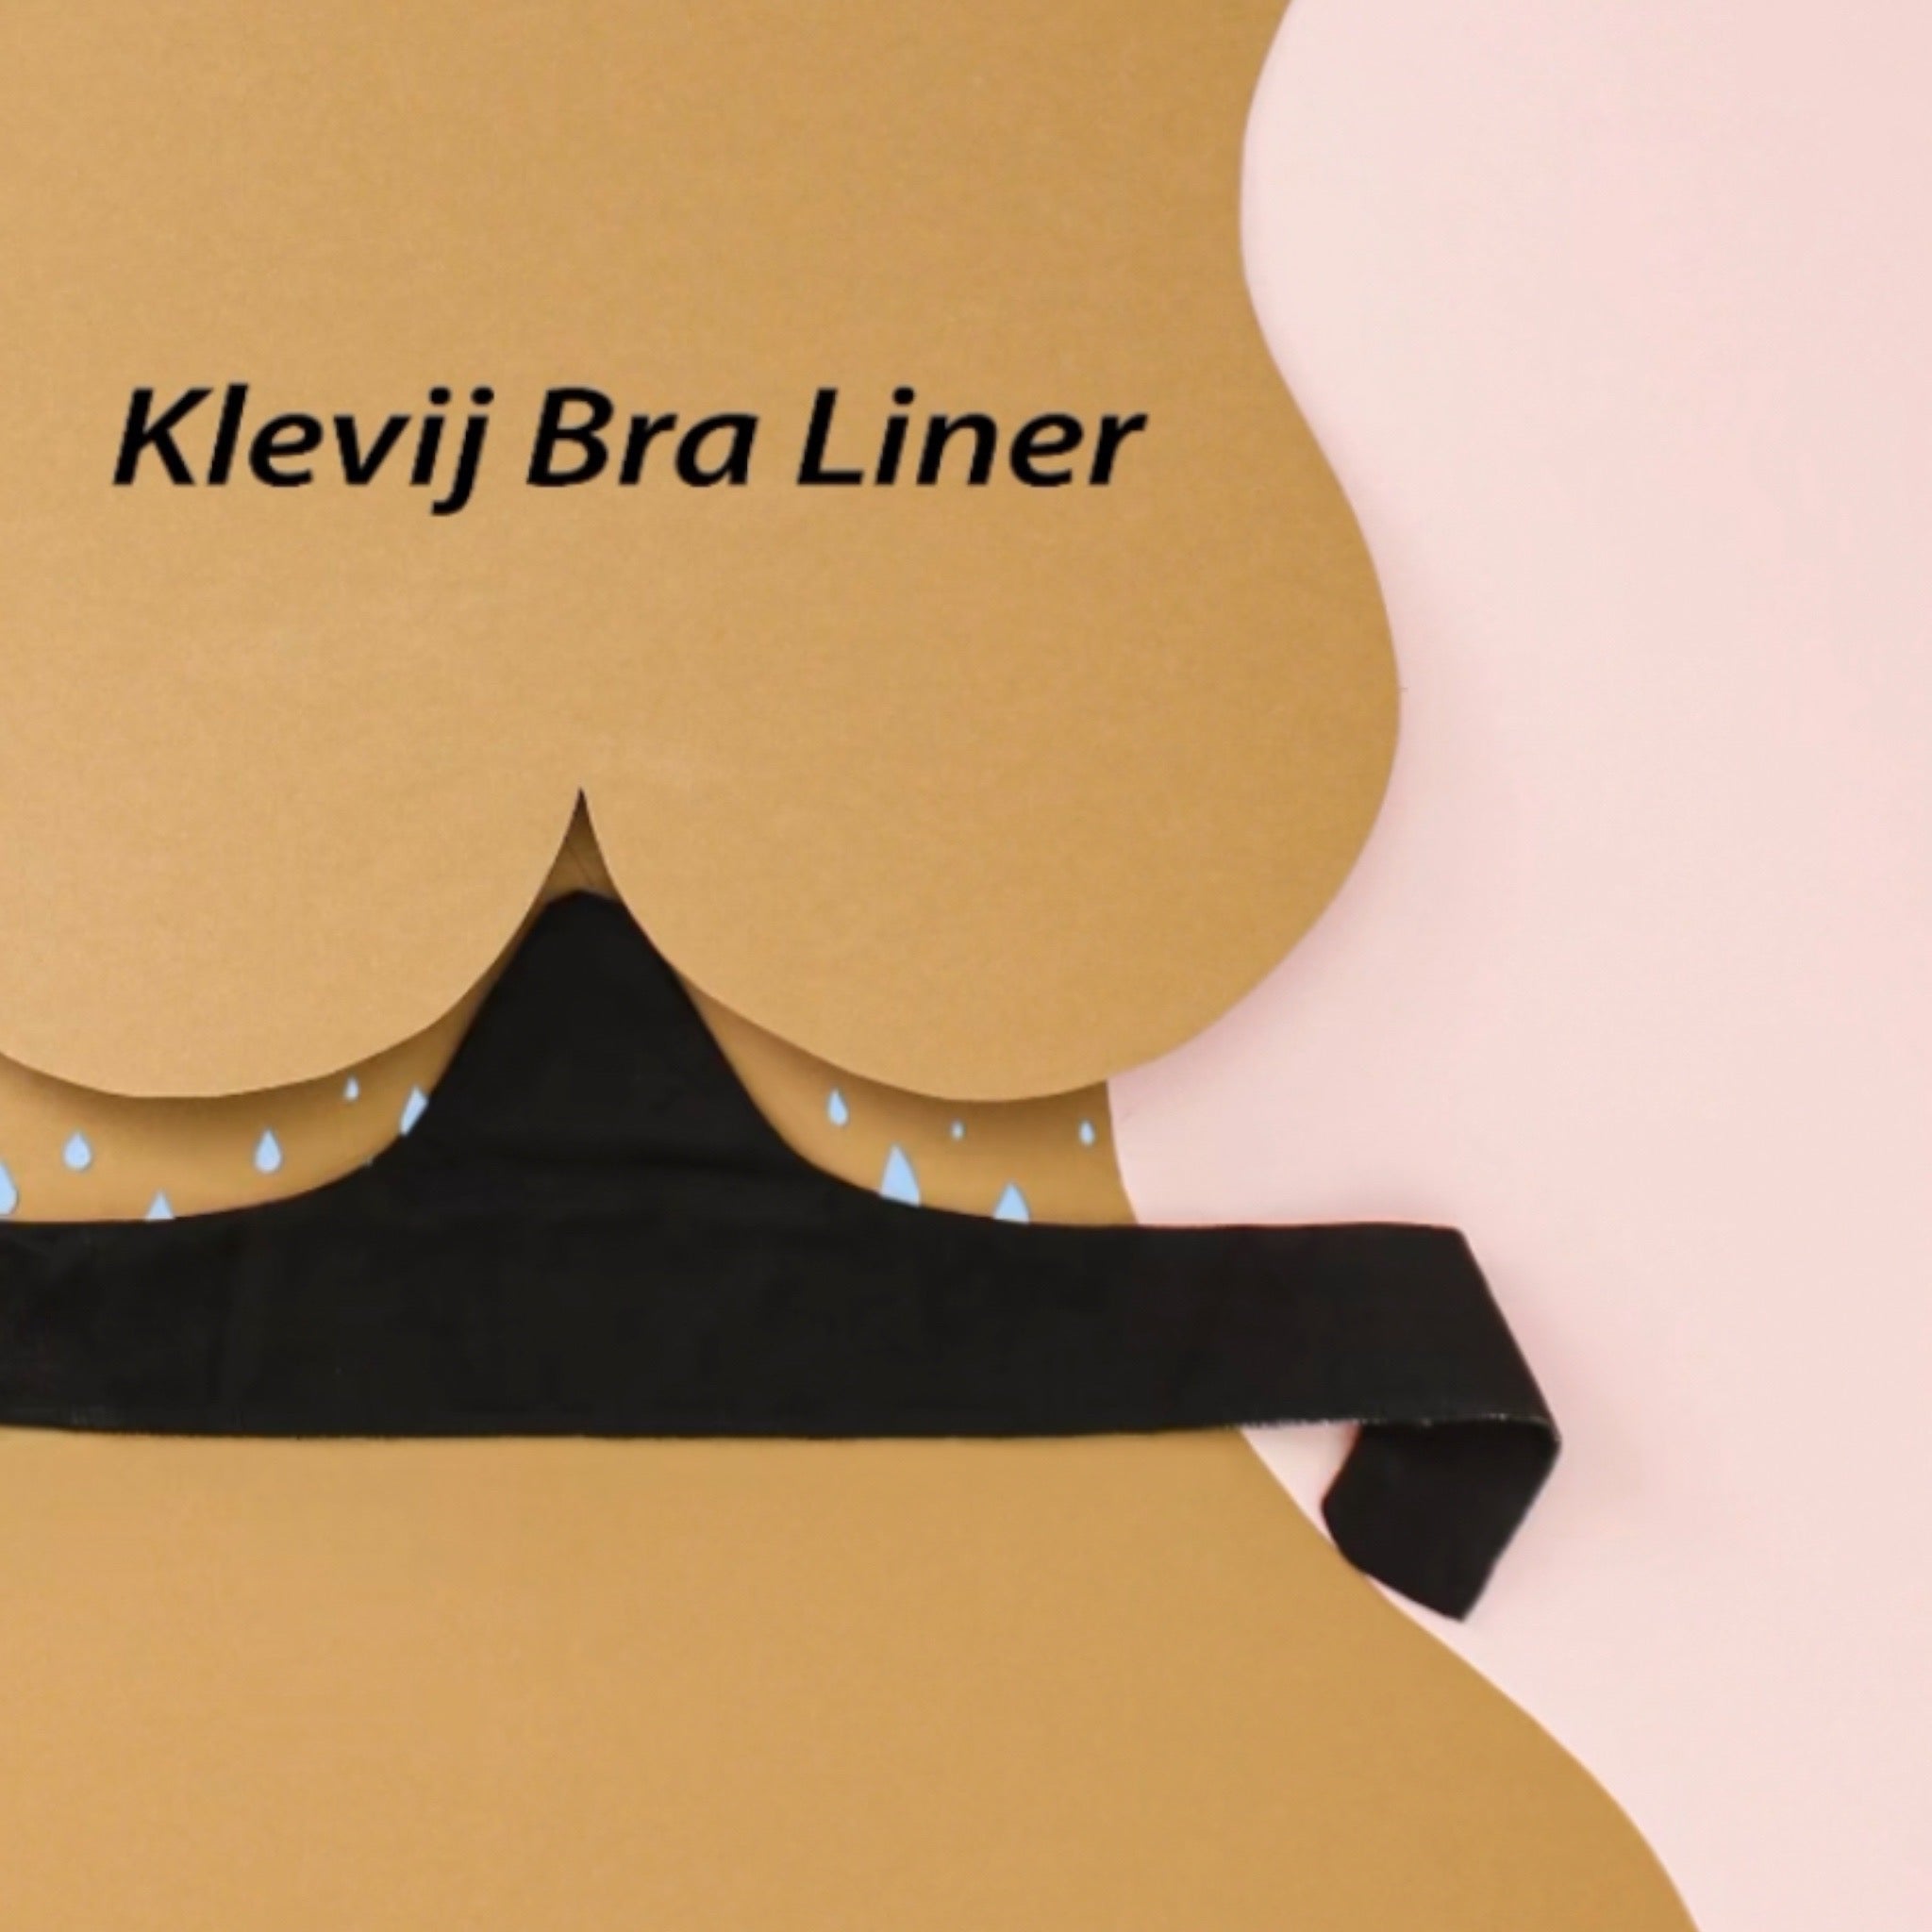 100% Cotton Bra Liner by Klevij | 9-Pack Multicolored | Soft, Breathable Comfort for All-Day Confidence